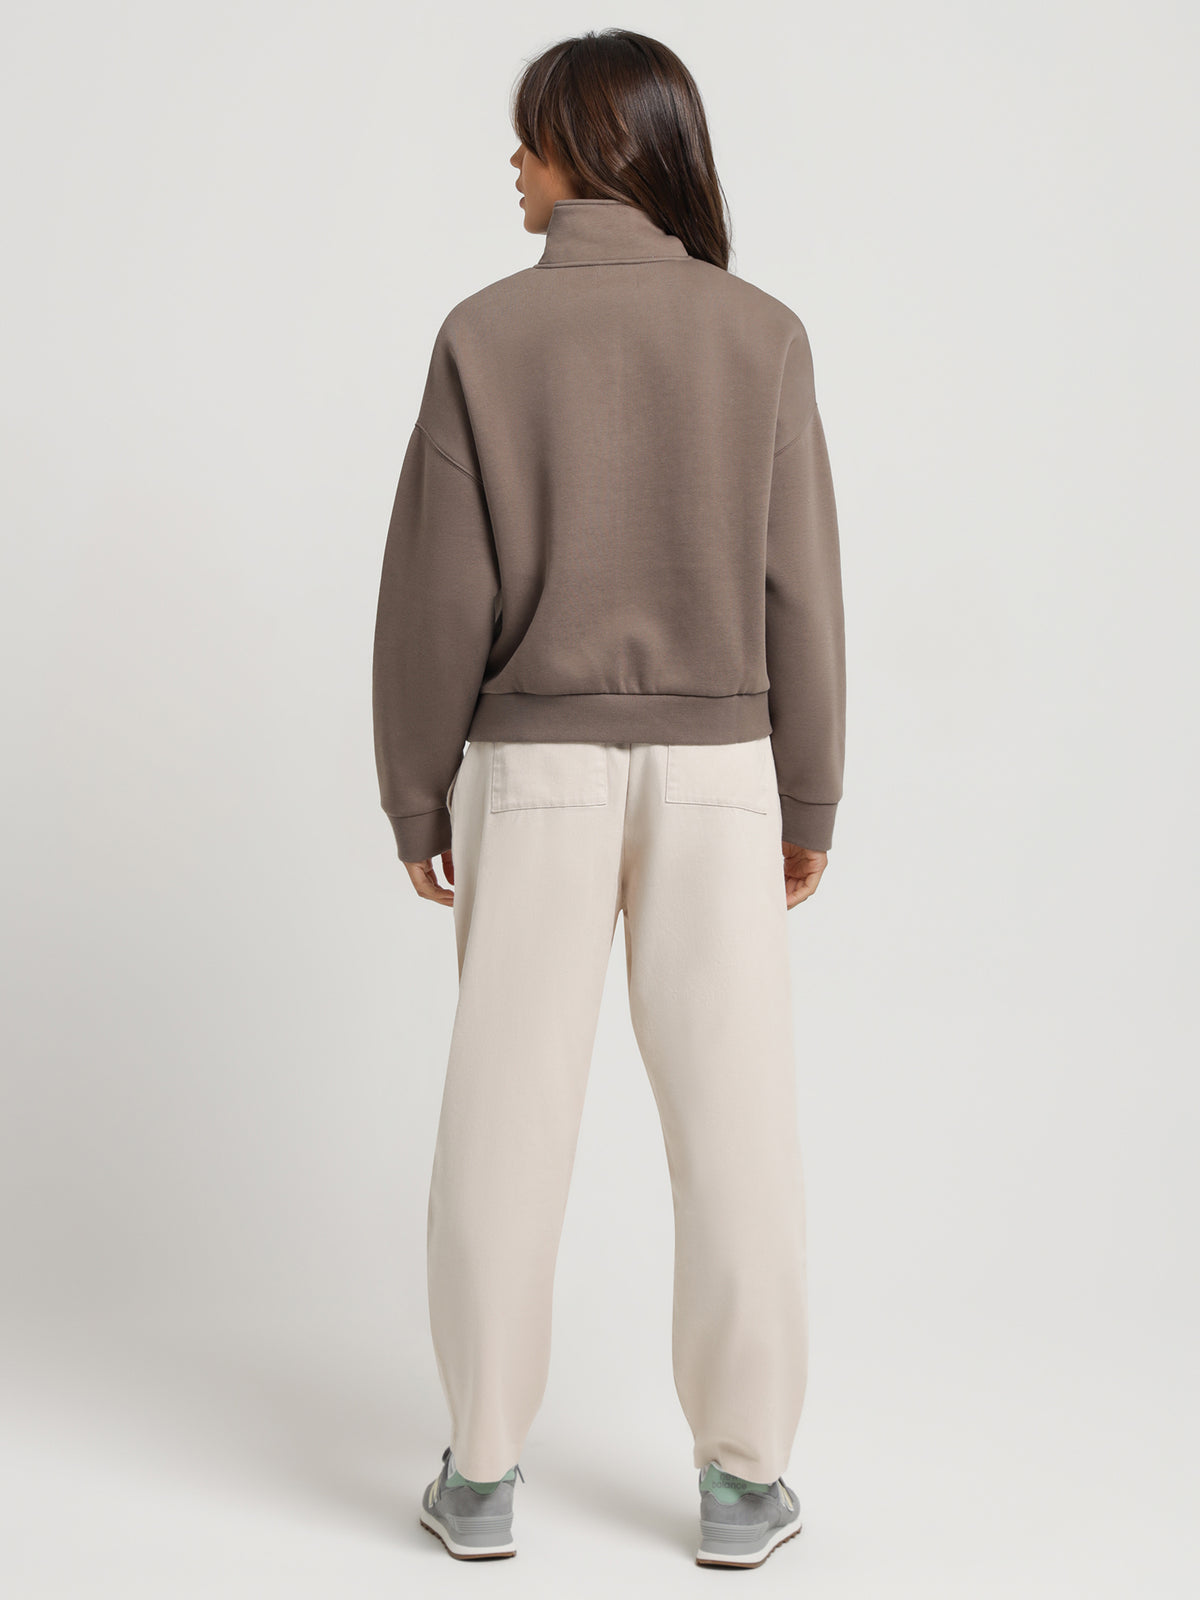 Classic Zip Front Sweater in Ash